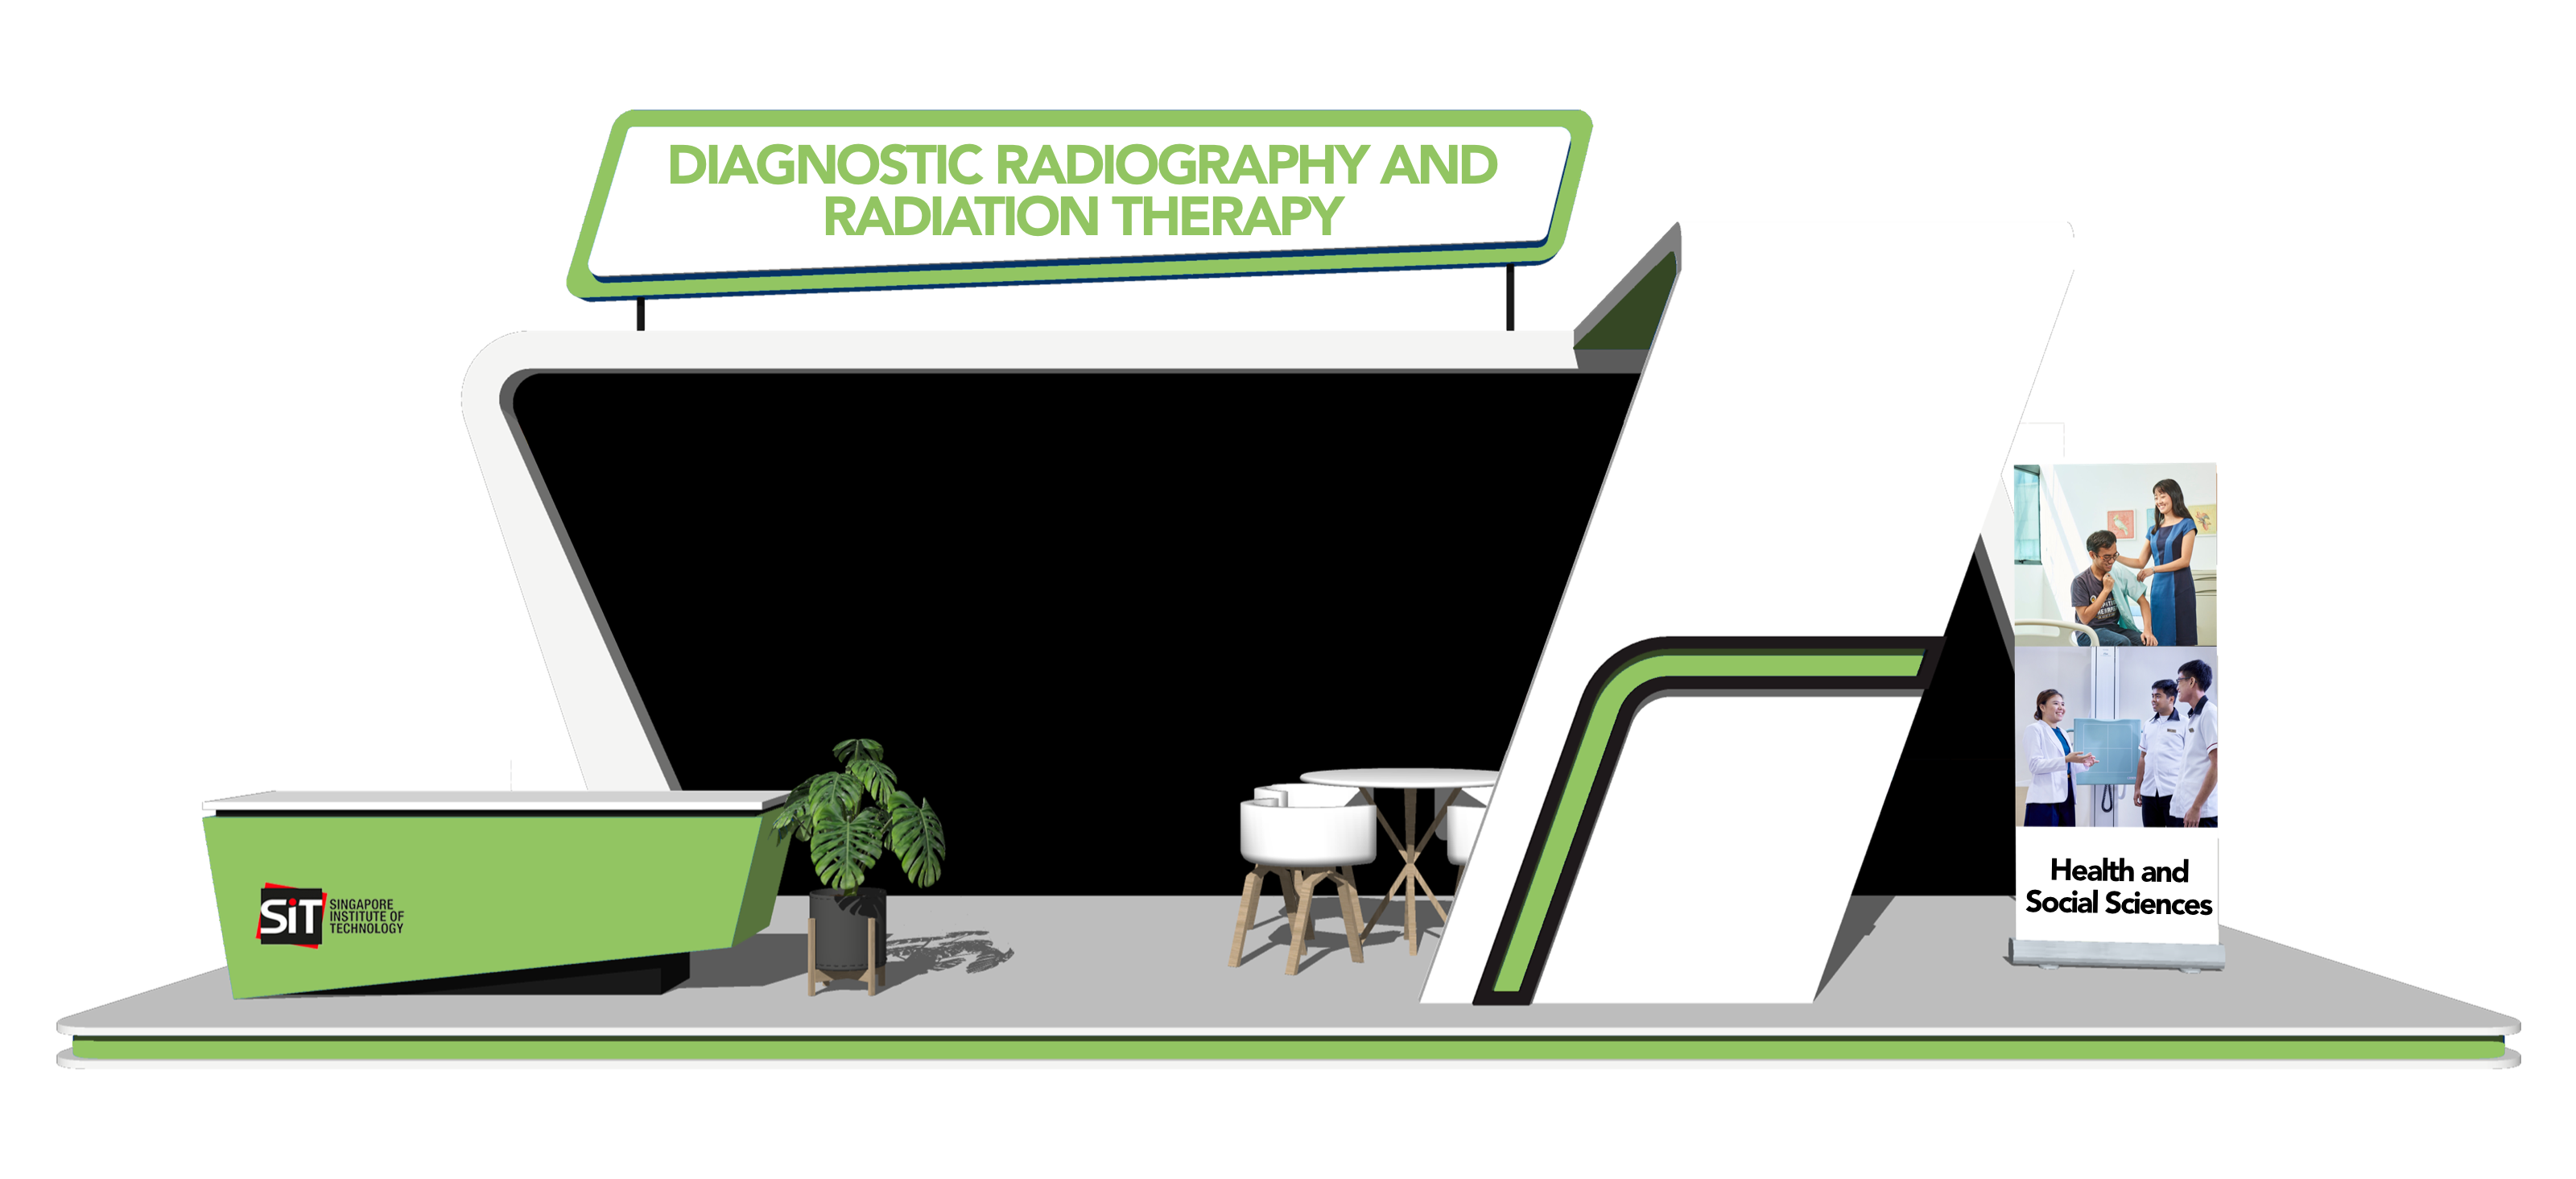 Diagnostic Radiography and Radiation Therapy